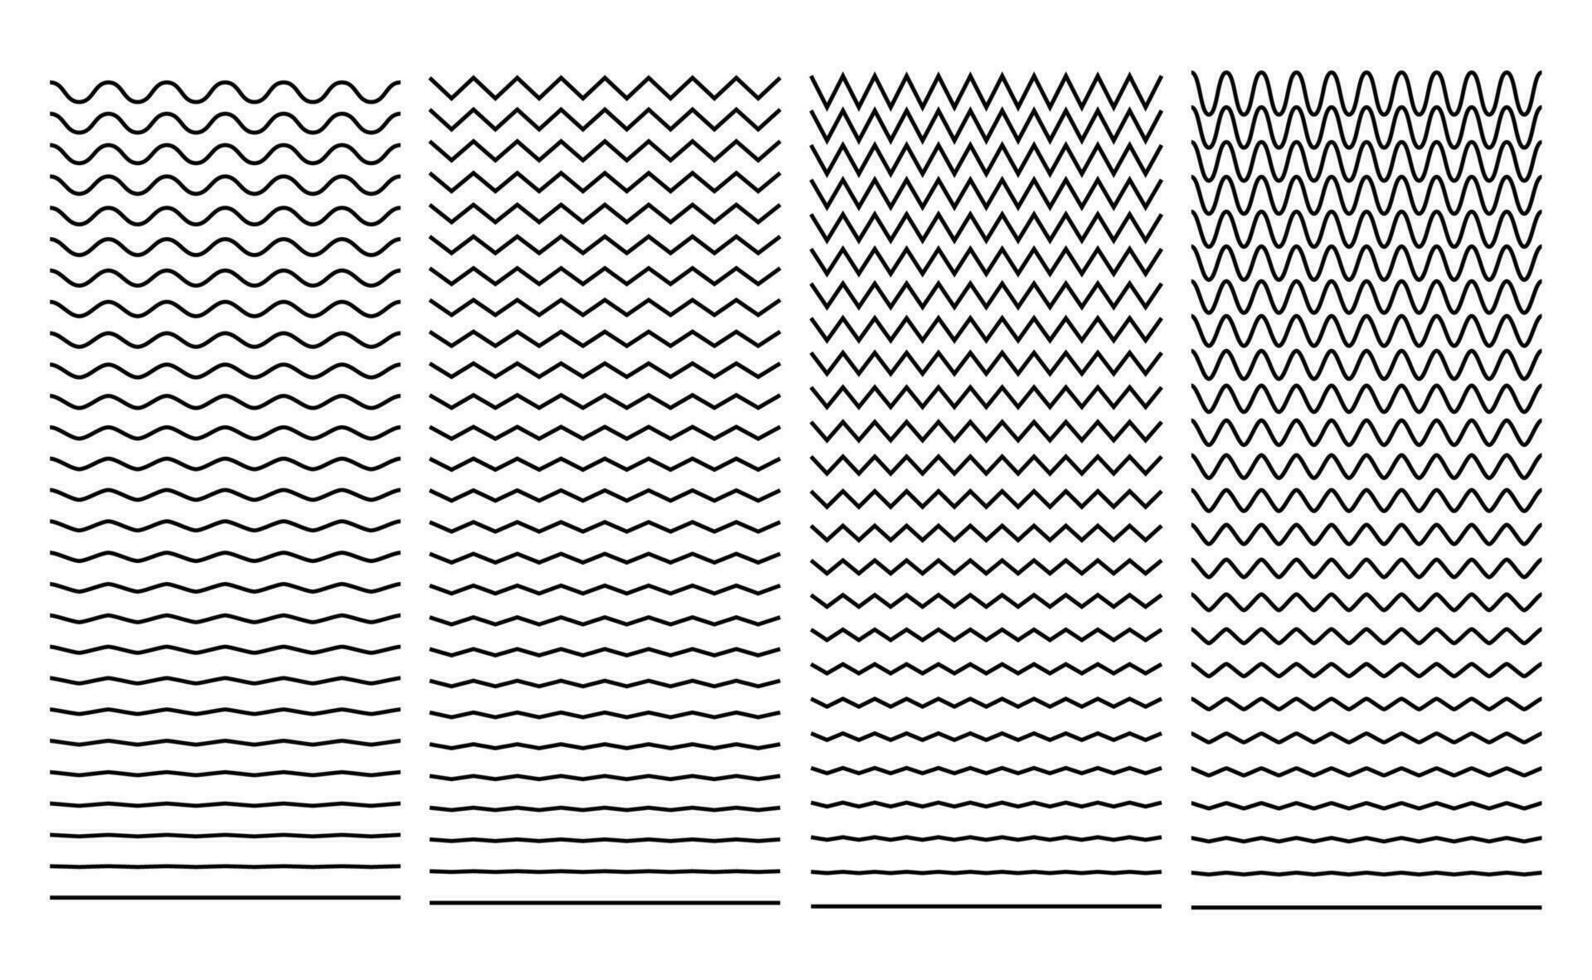 Thin wavy lines seamless pattern. Repeatable wavy zigzag lines vector pattern.